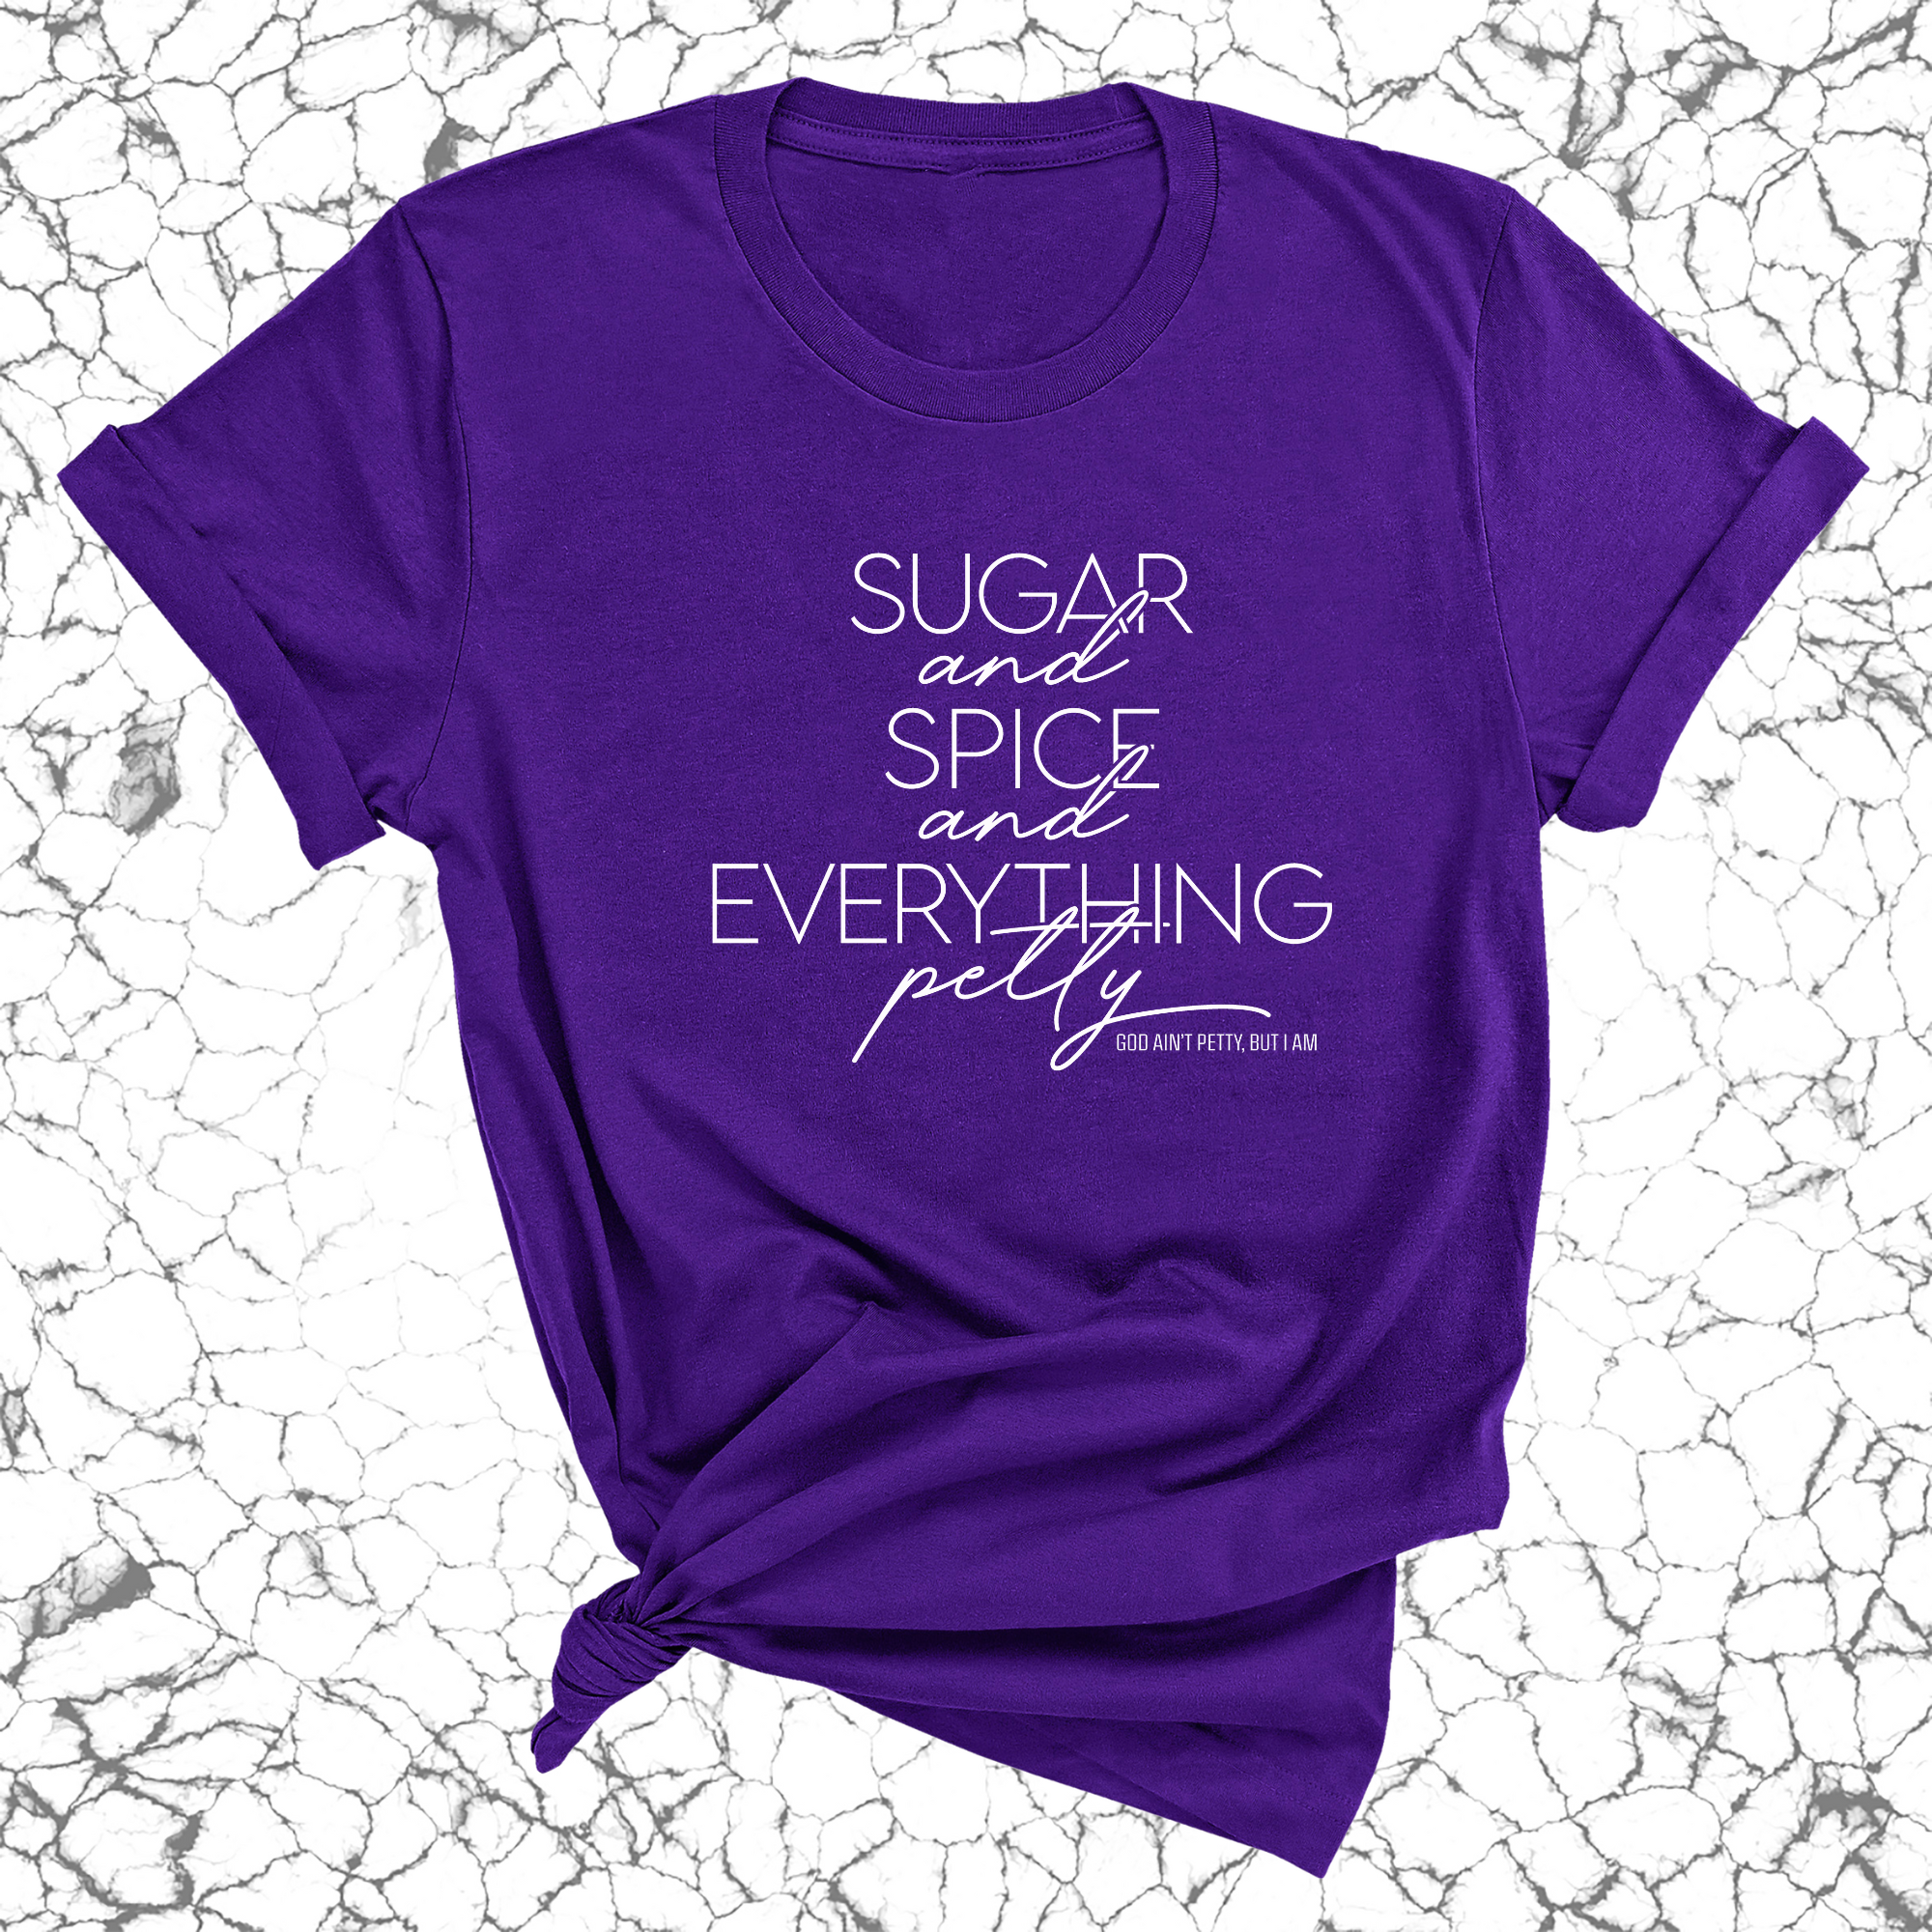 Sugar and Spice and Everything petty Unisex Tee-T-Shirt-The Original God Ain't Petty But I Am